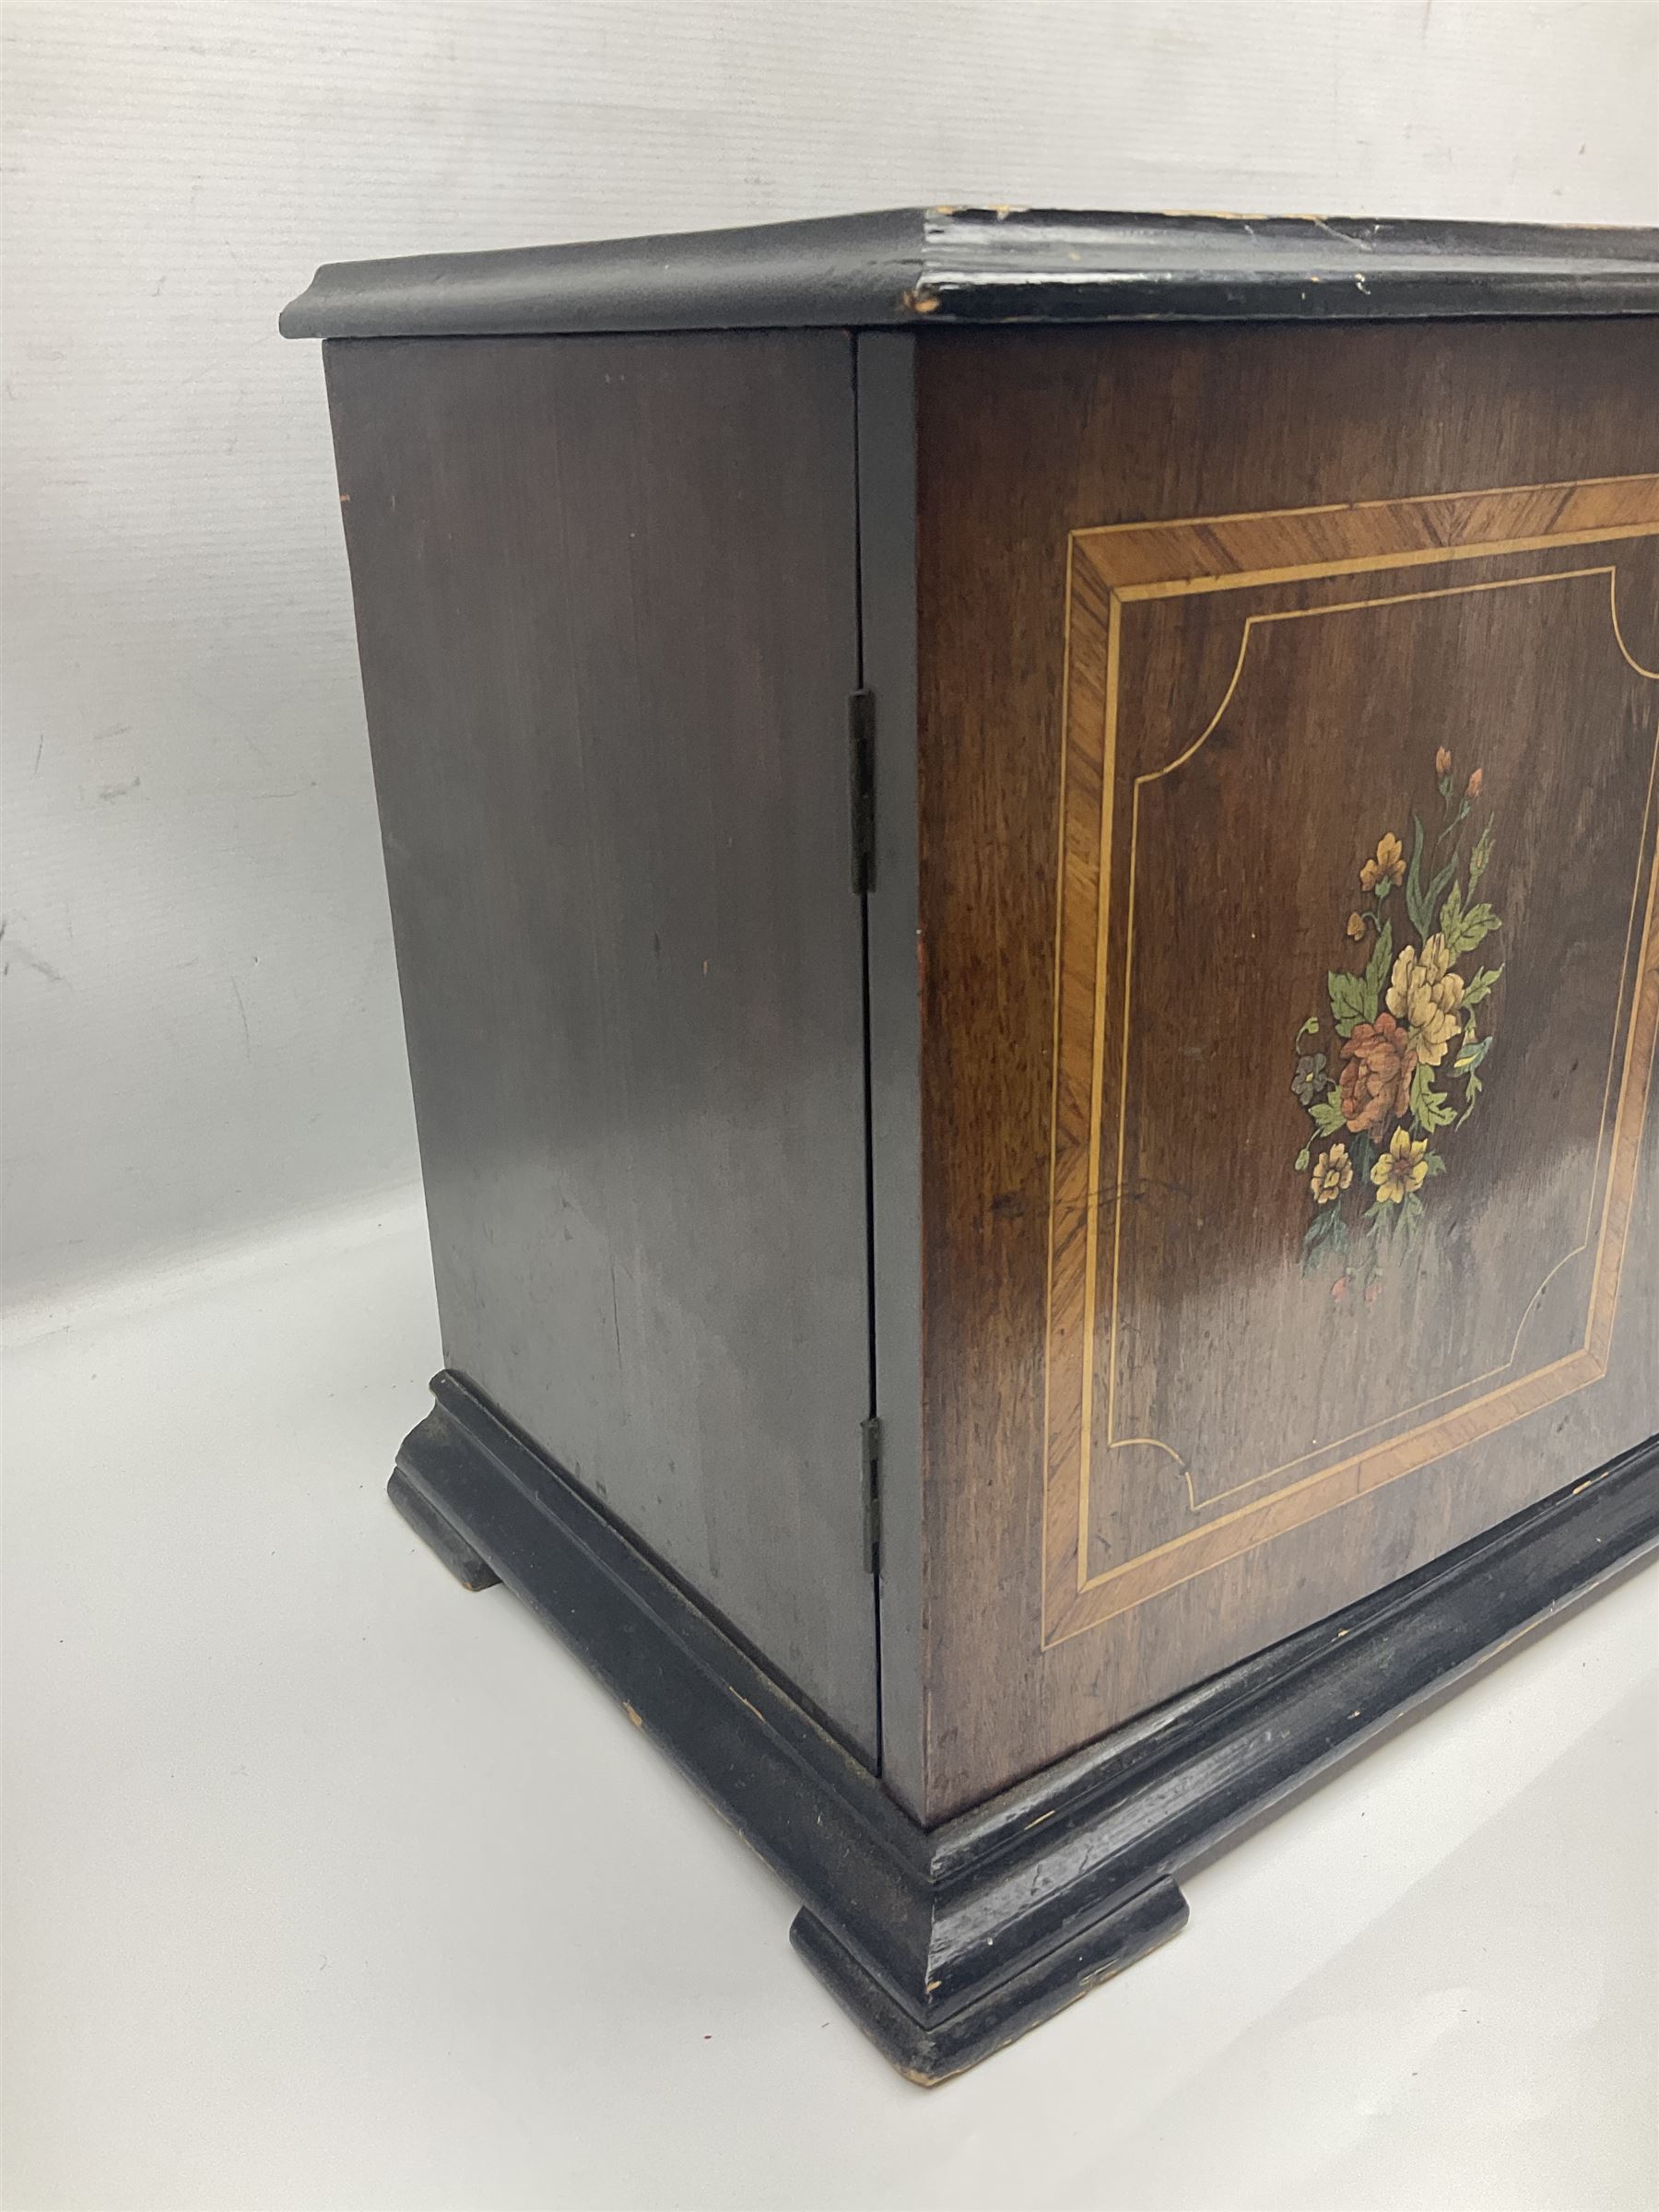 Swiss - 19th-century cylinder music box in a mahogany "buffet" style case with inlaid door panels - Image 12 of 13